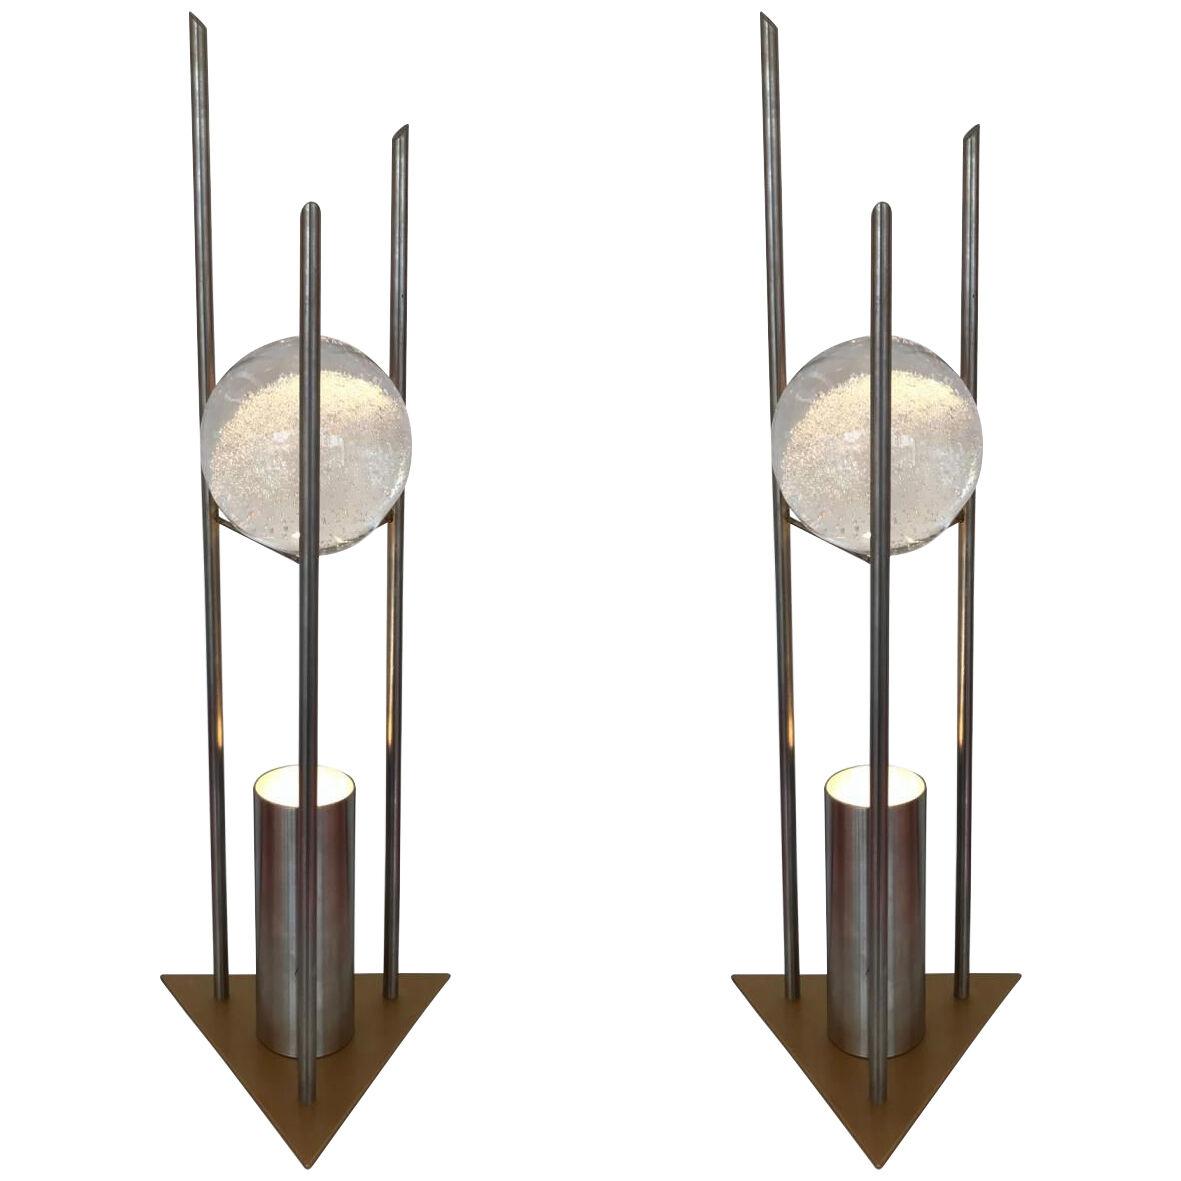 Pair of Lamps Glass Ball Sculpture by RW Manufaktur, Germany, 1980s